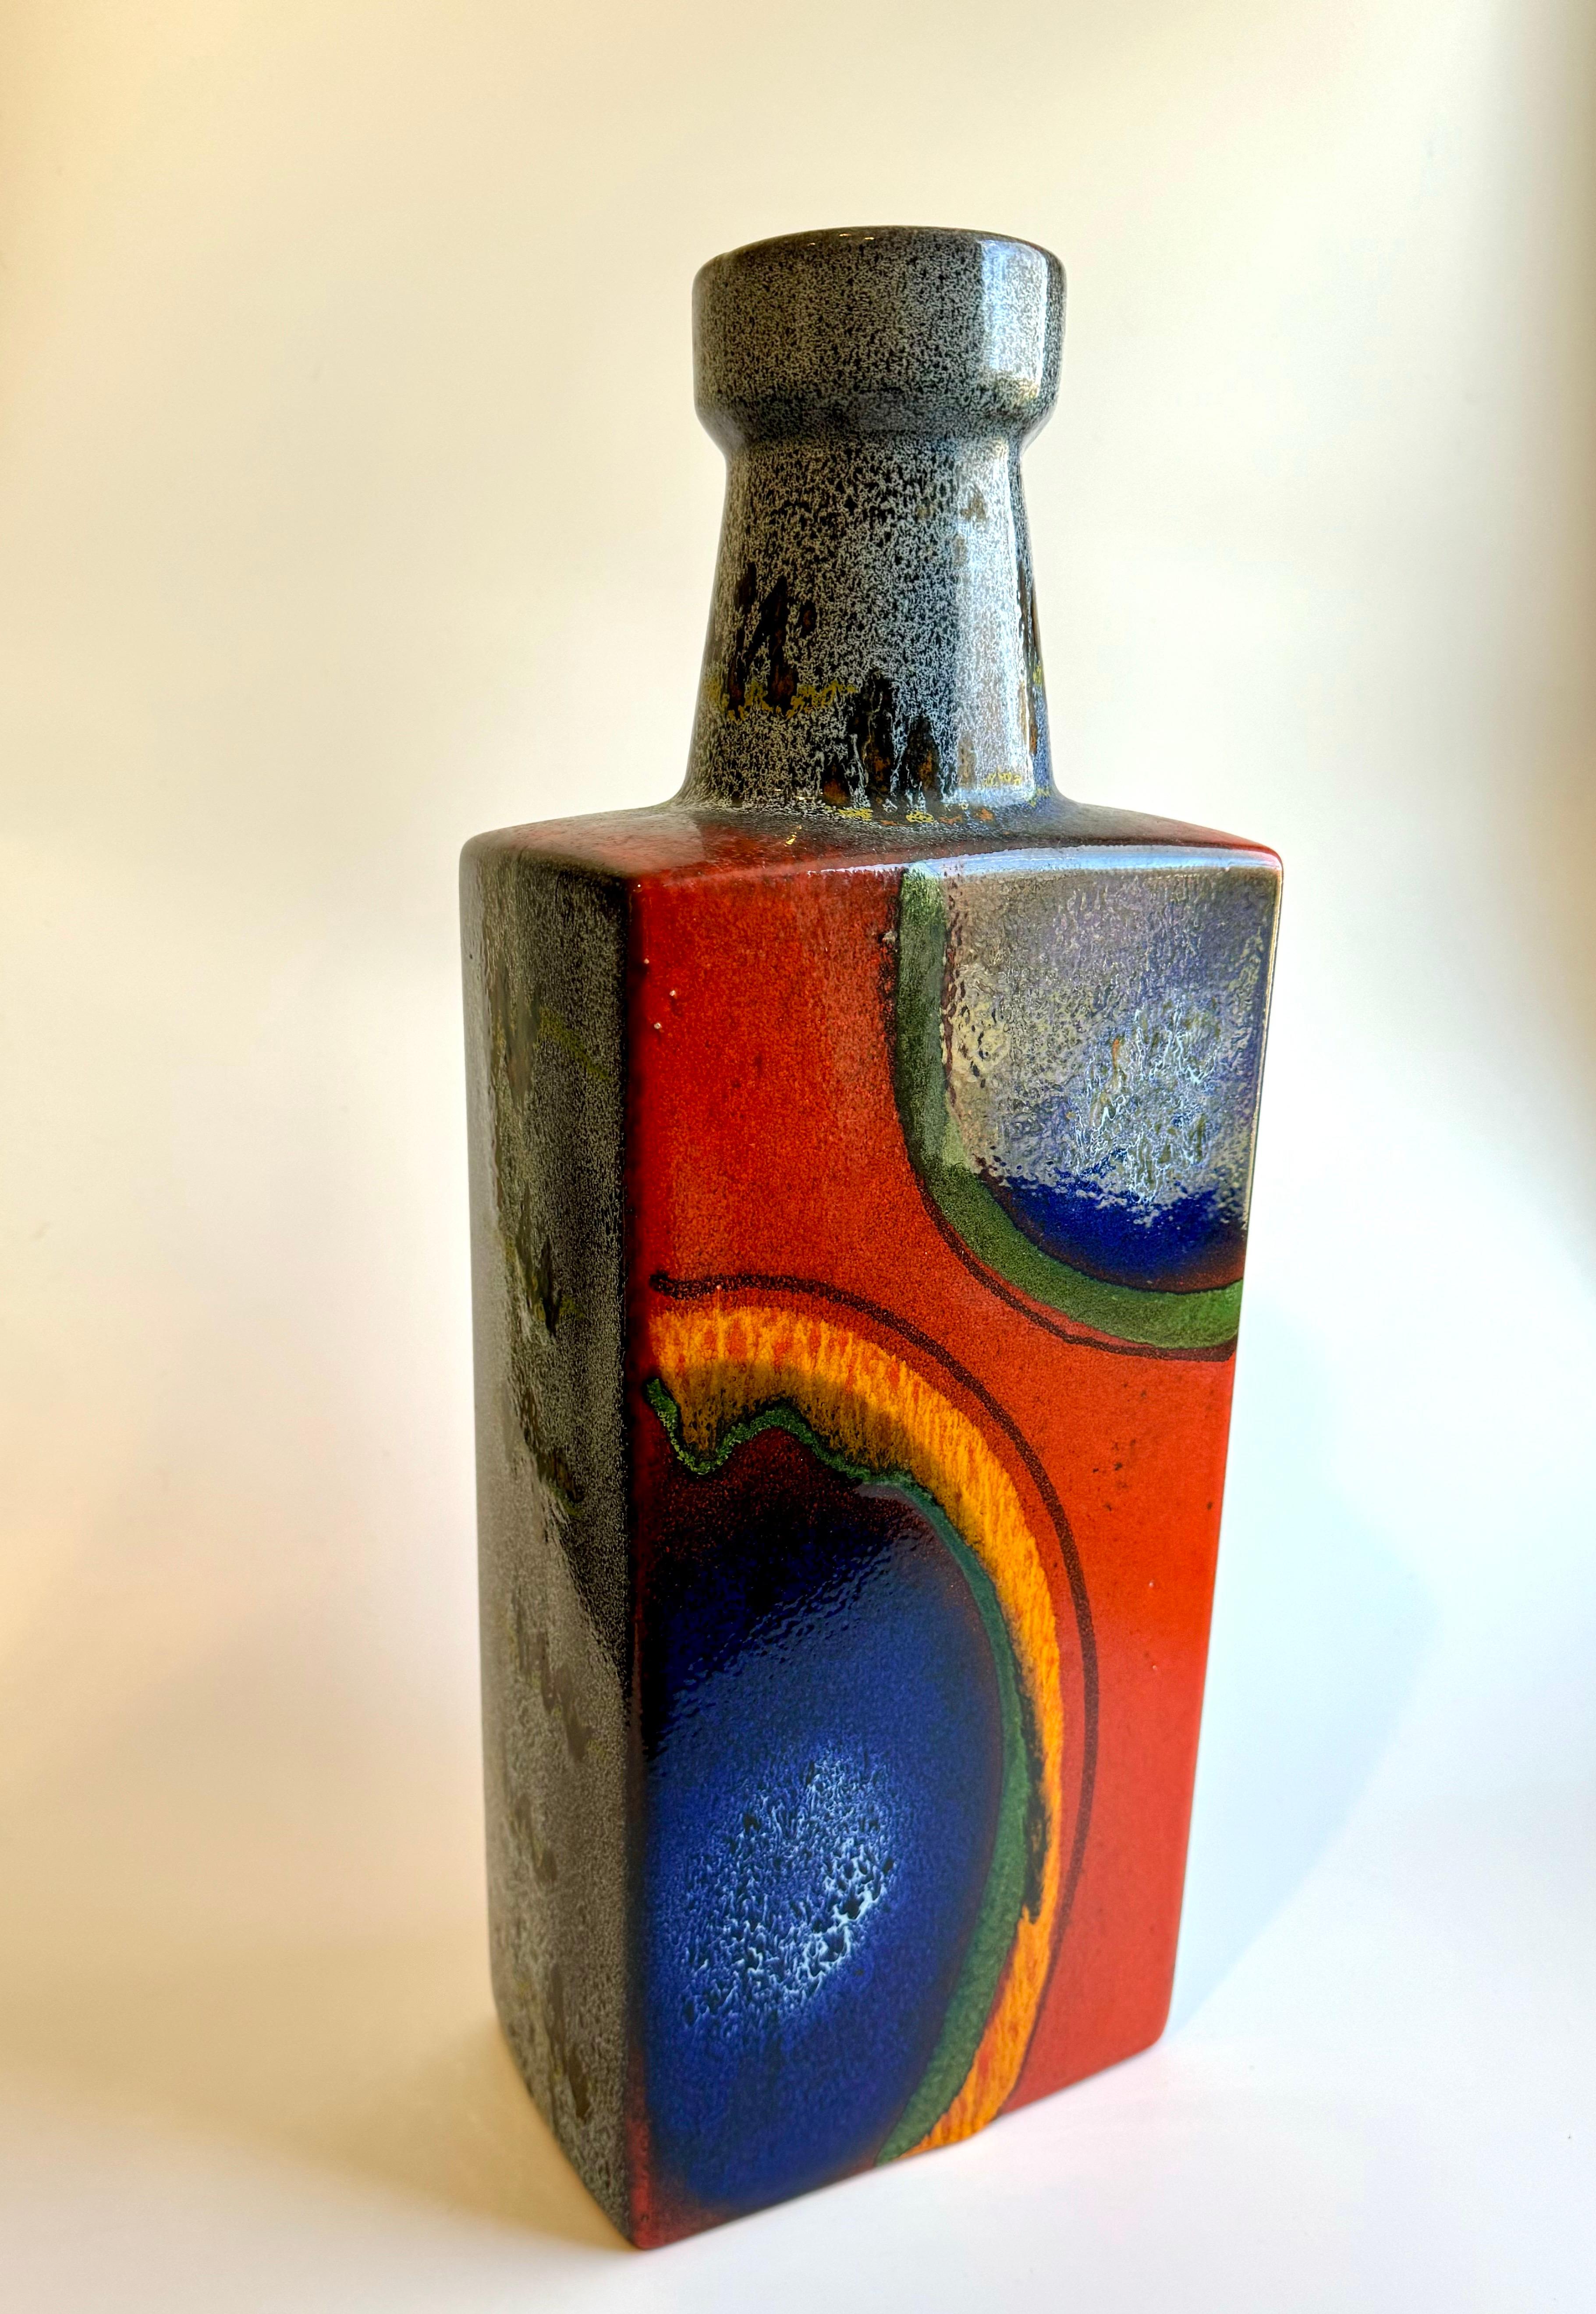 This is a large West German vase produced by Scheurich Keramik, which was one of the largest producers of ceramics during the mid-20th century. The vase has a distinctive glaze with a bold color palette that includes orange, blue, and green, set